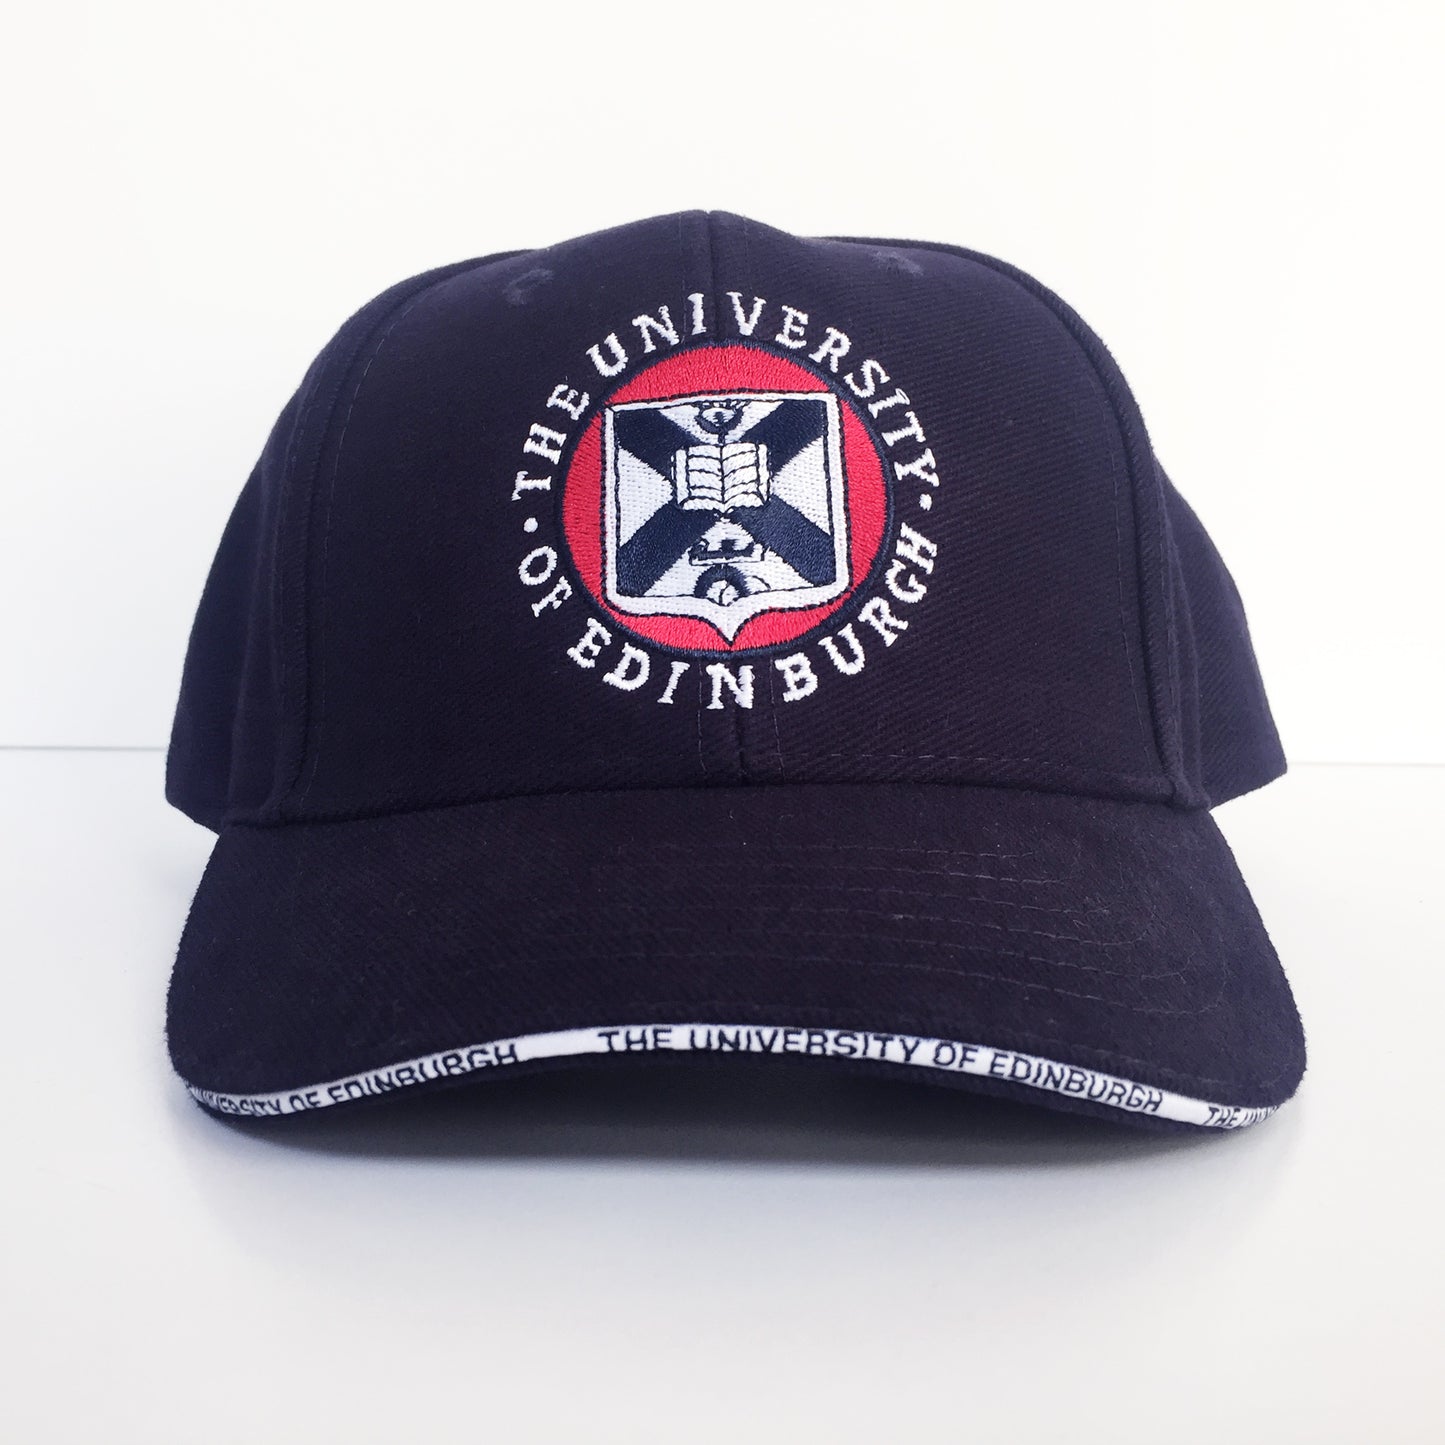 Alternate angle of the navy embroidered cap which demonstrates the white piping on the visor that reads 'The University of Edinburgh' 